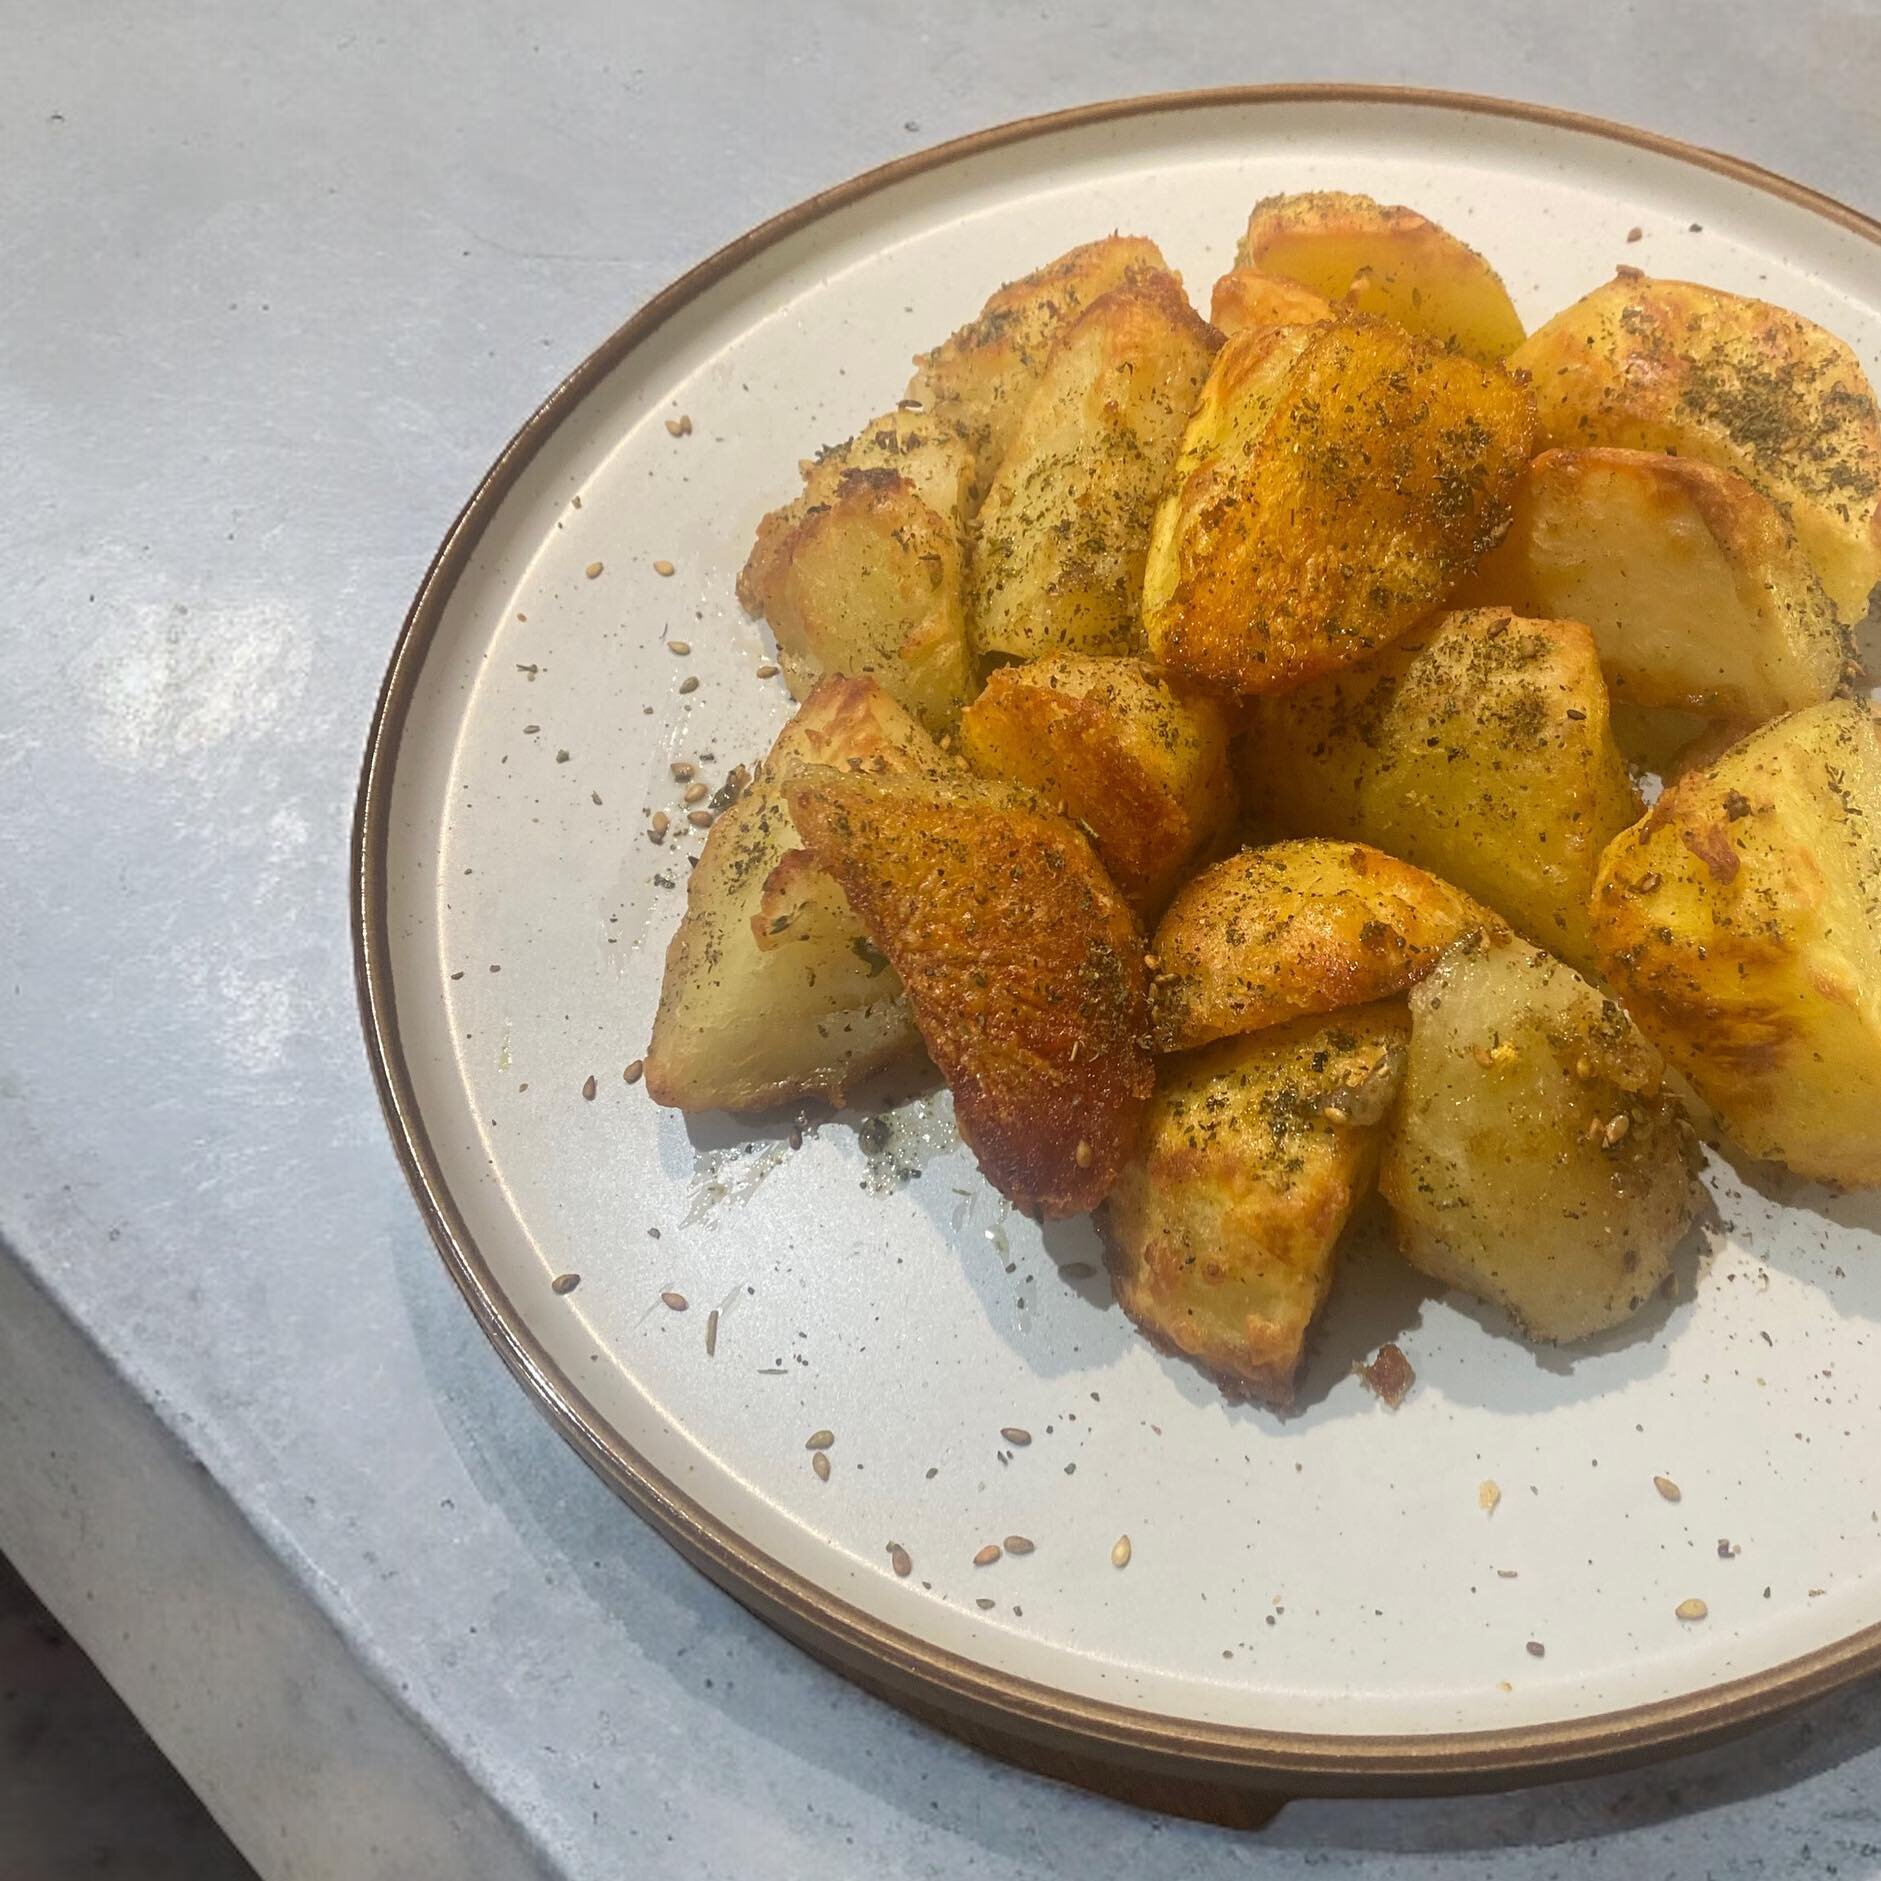 Who doesn&rsquo;t love roasted potatoes with Za&rsquo;atar 🤍 delicious! 

Za&rsquo;atar brings bold &amp; beautiful flavours to any dish. 

We add them to our eggs in the morning, to our roasted Sunday brunch, to tomato olive oil salad.

Za&rsquo;at